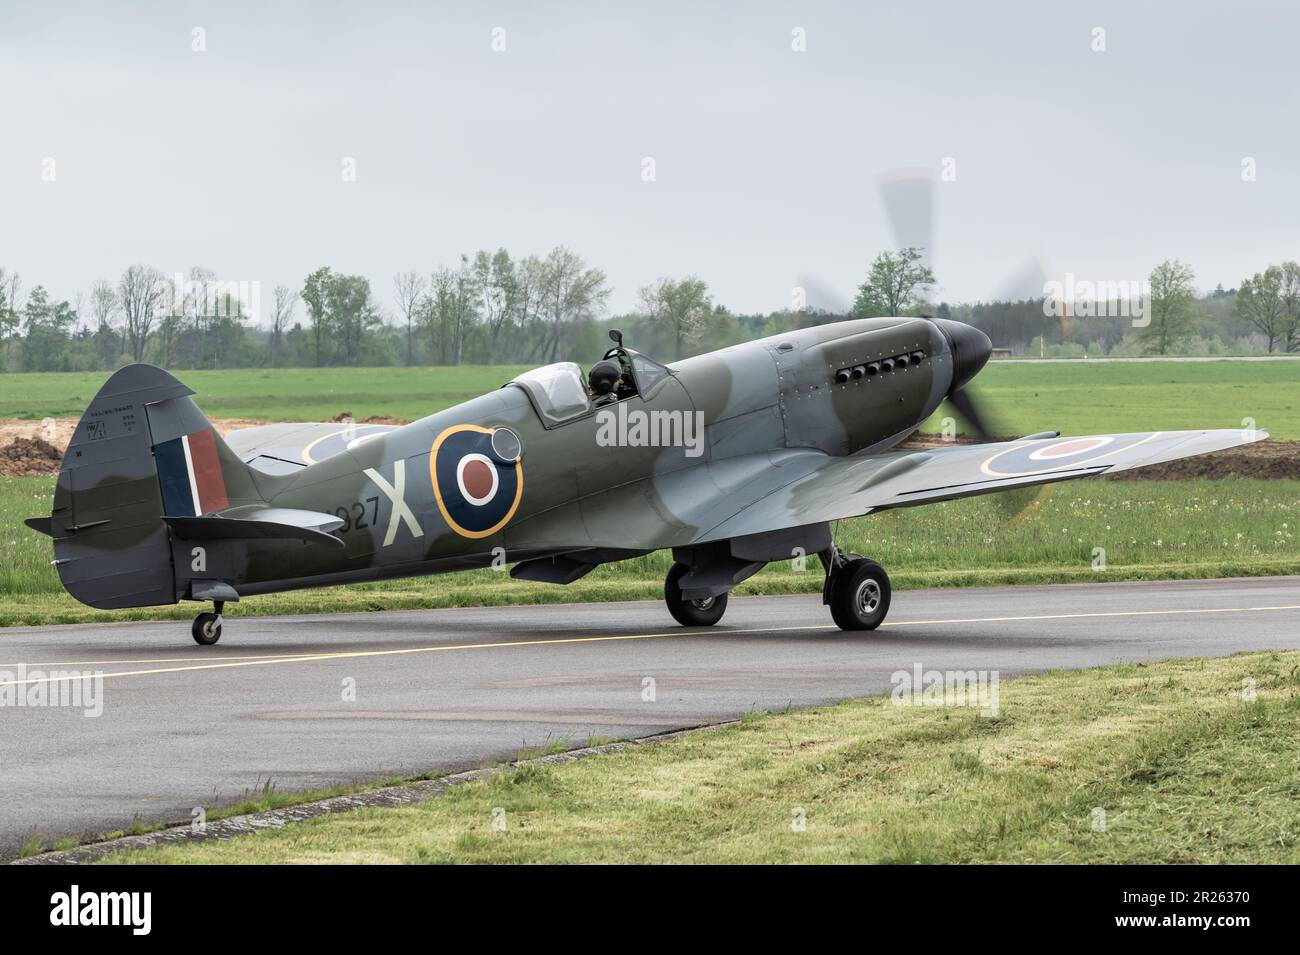 The Supermarine Spitfire is a British single-seat fighter aircraft used by the Royal Air Force and other Allied countries during WWII. Stock Photo